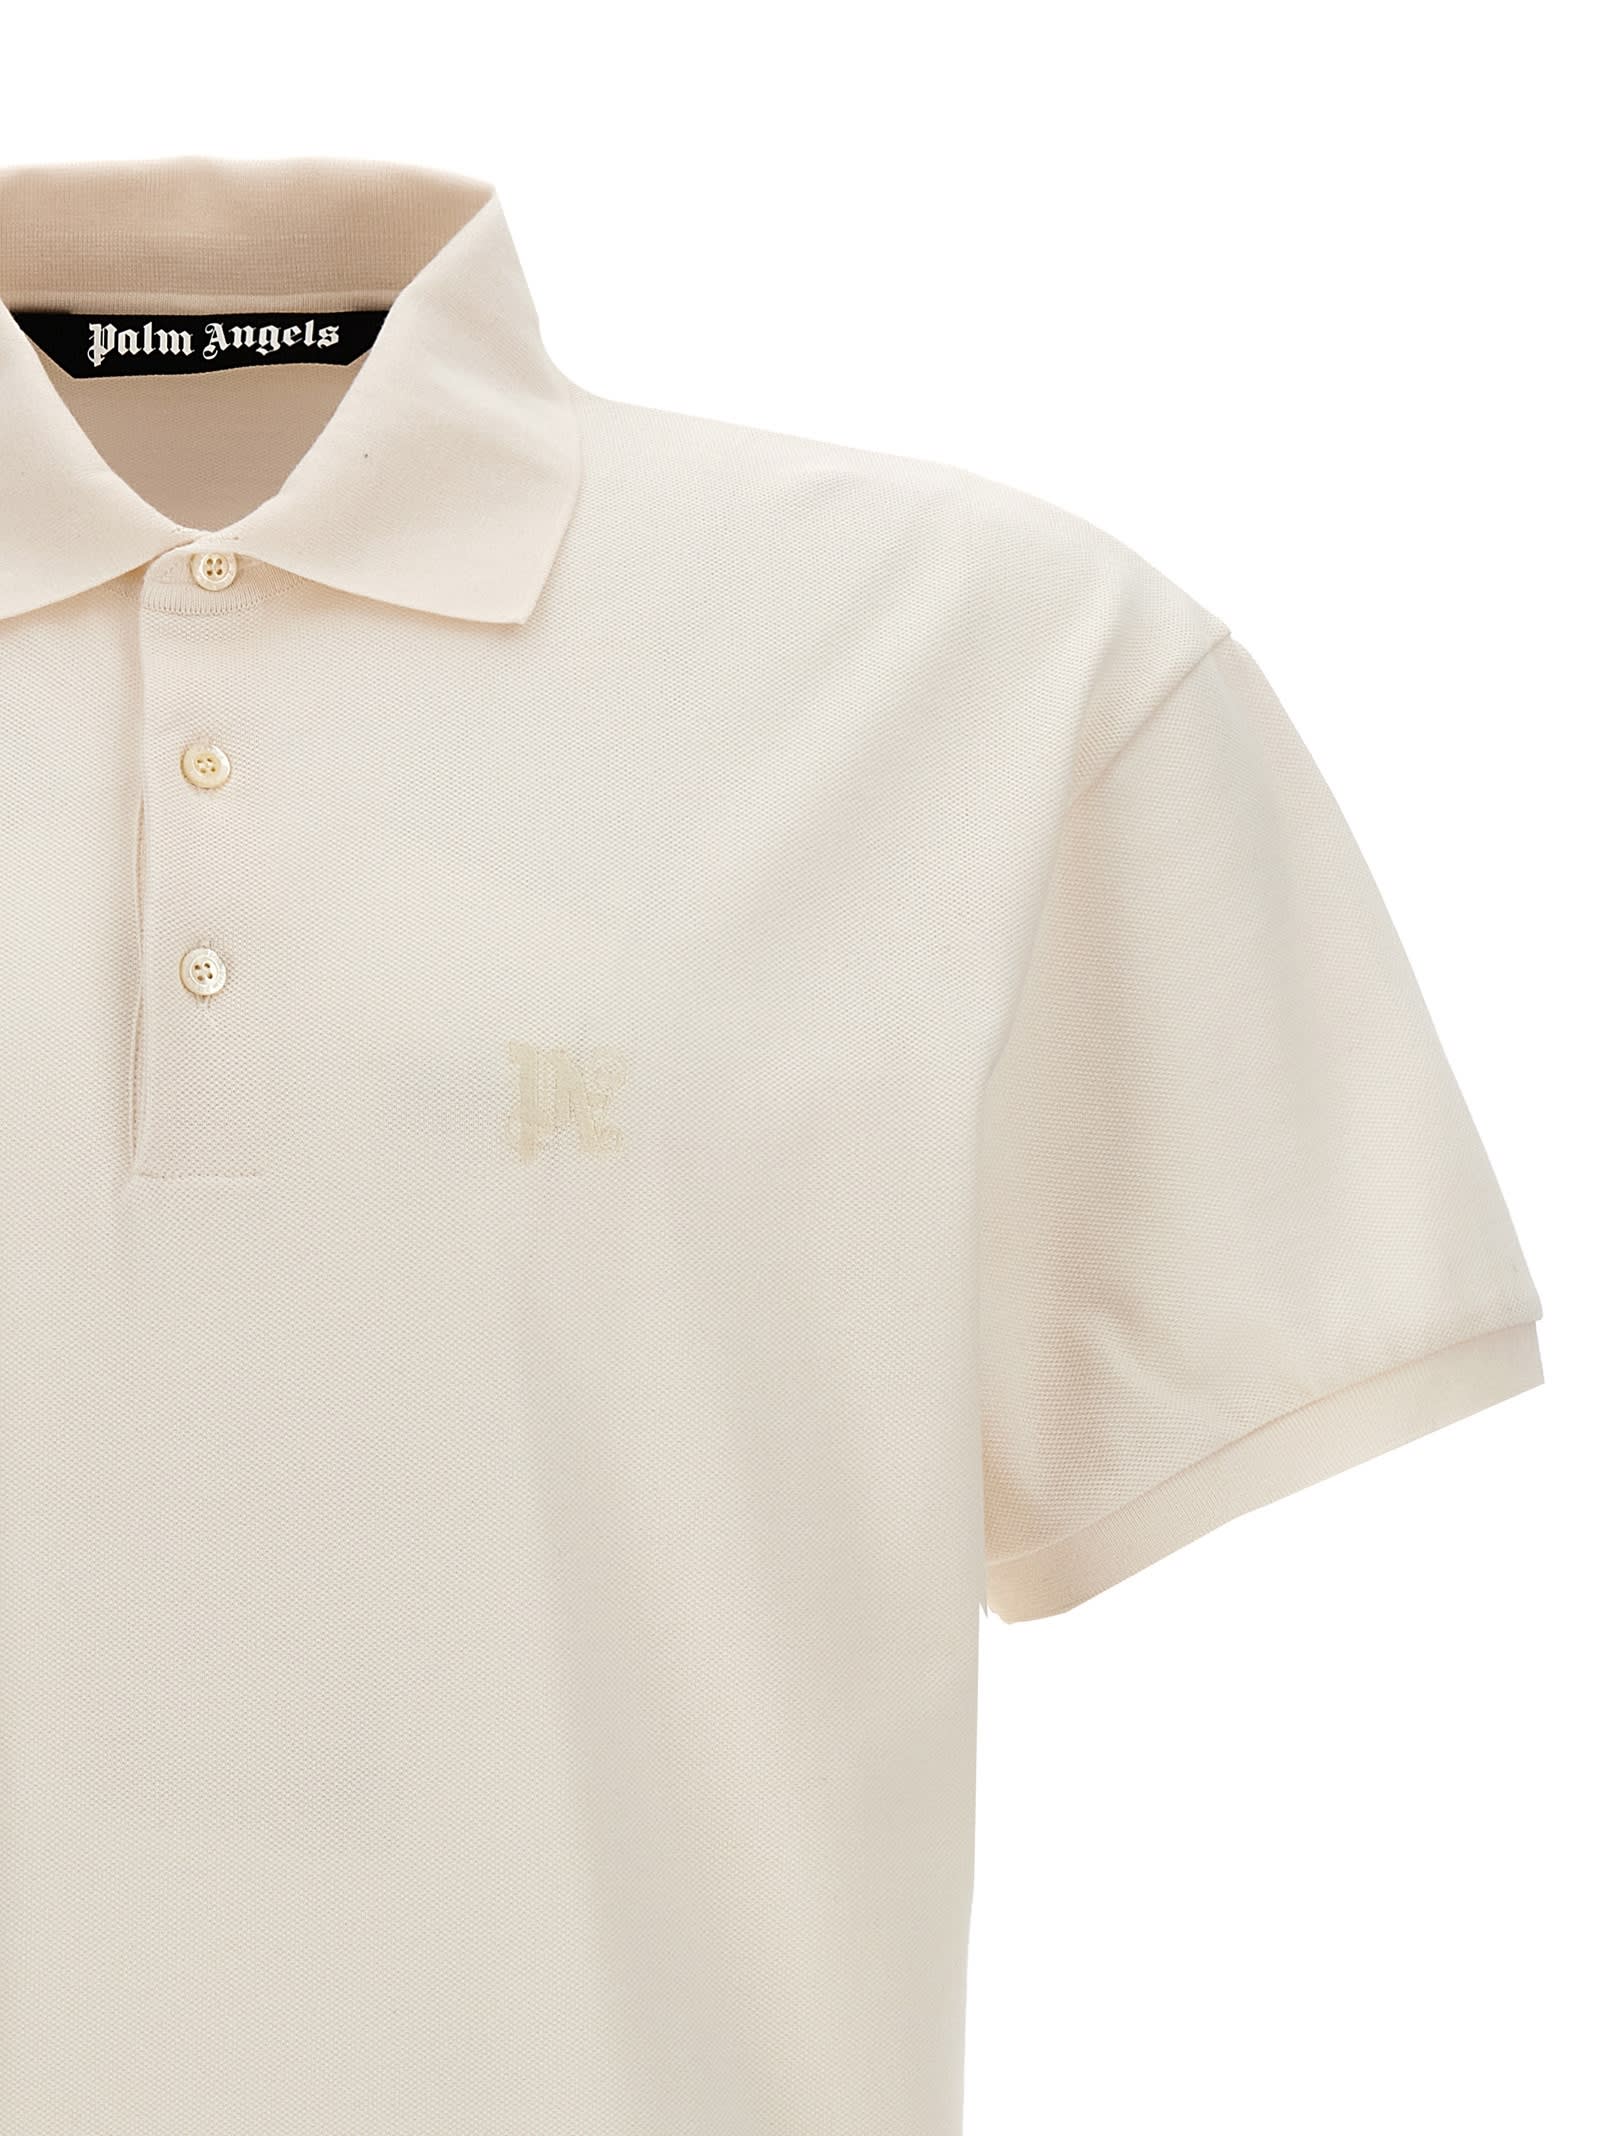 Shop Palm Angels Monogram Polo Shirt In White